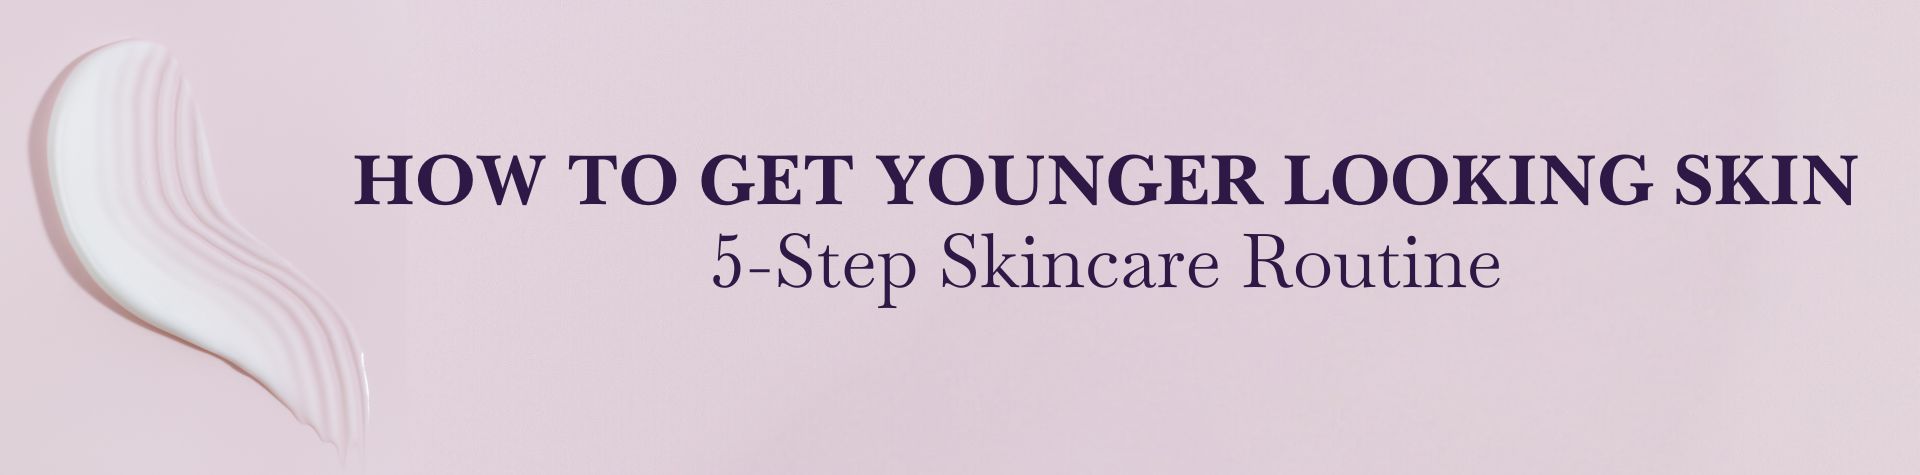 How to Get Younger Looking Skin